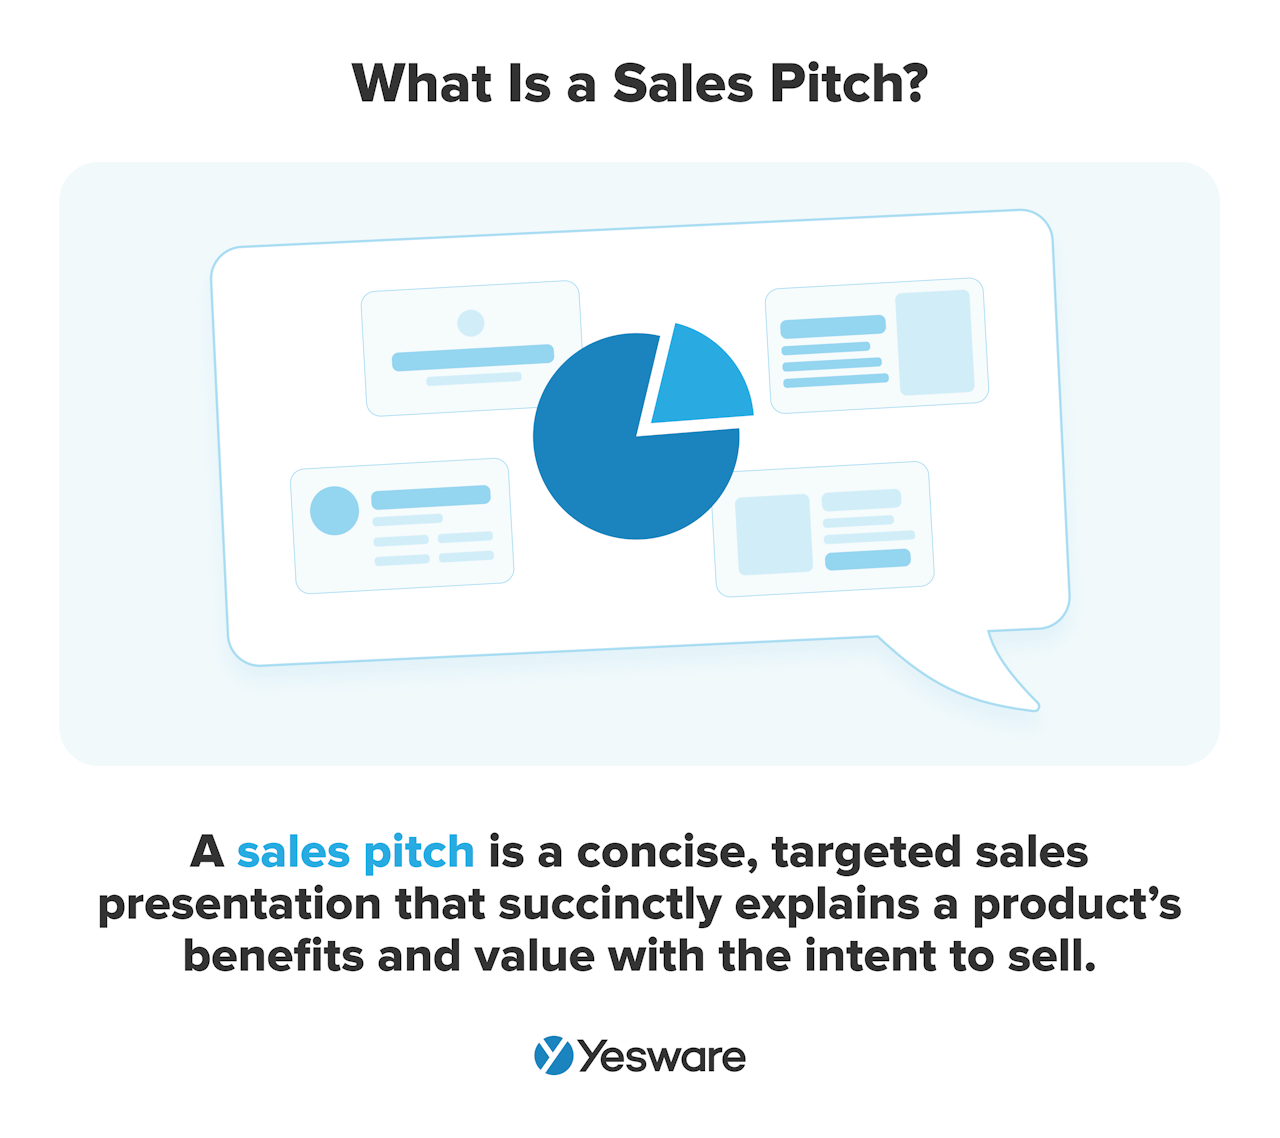 What is a sales pitch?